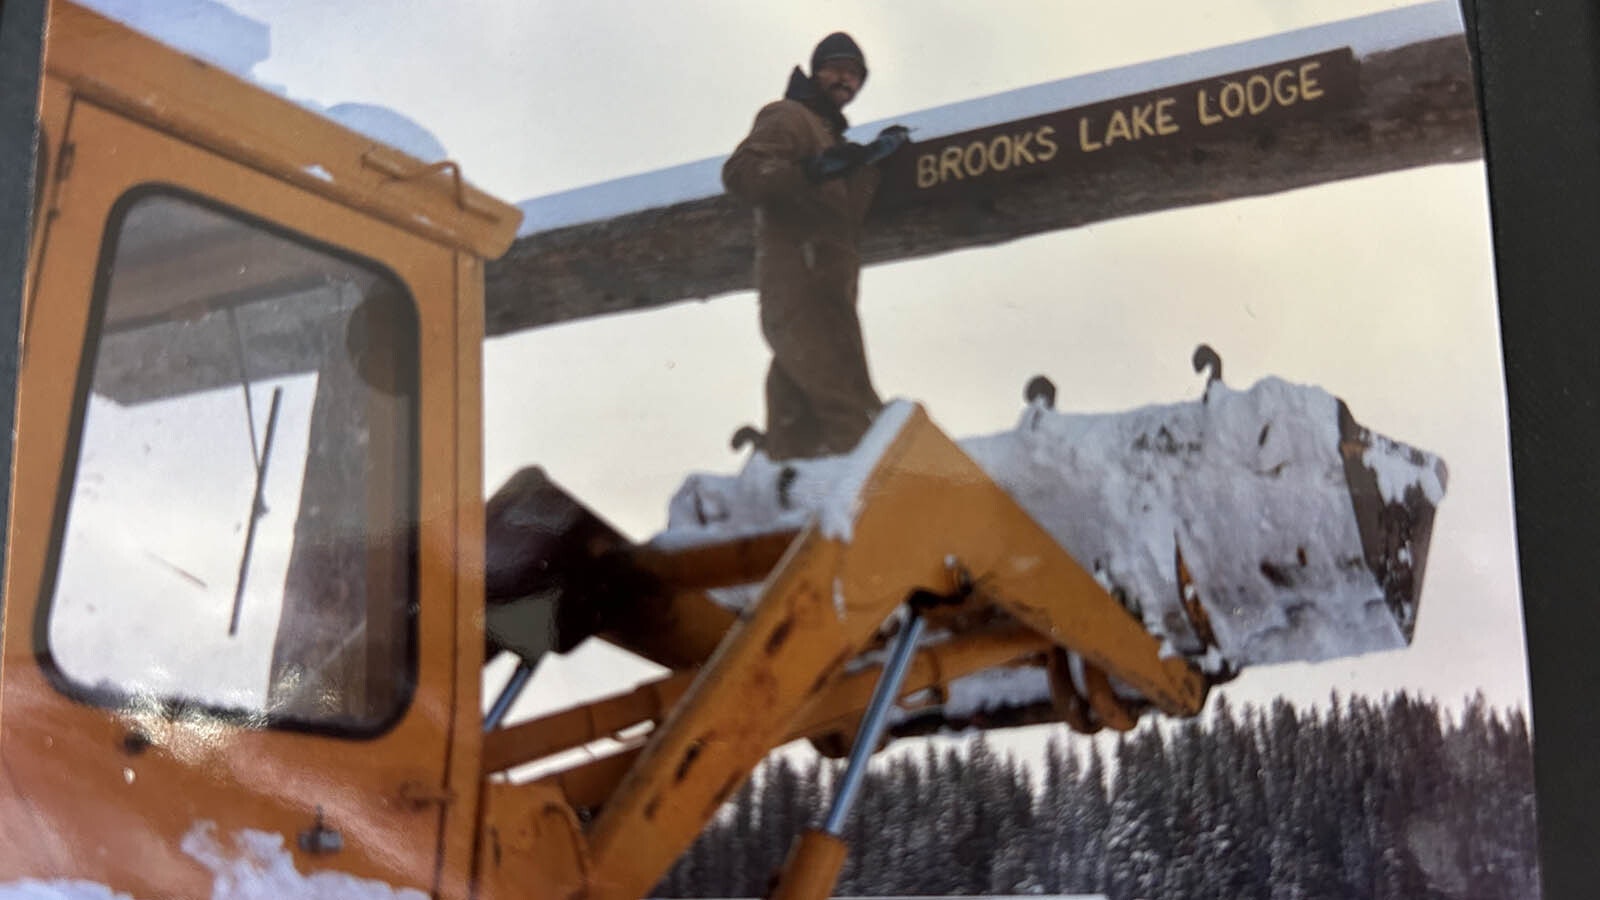 Putting up the Brooks Lake Lodge sign the opening of the 1988 season.